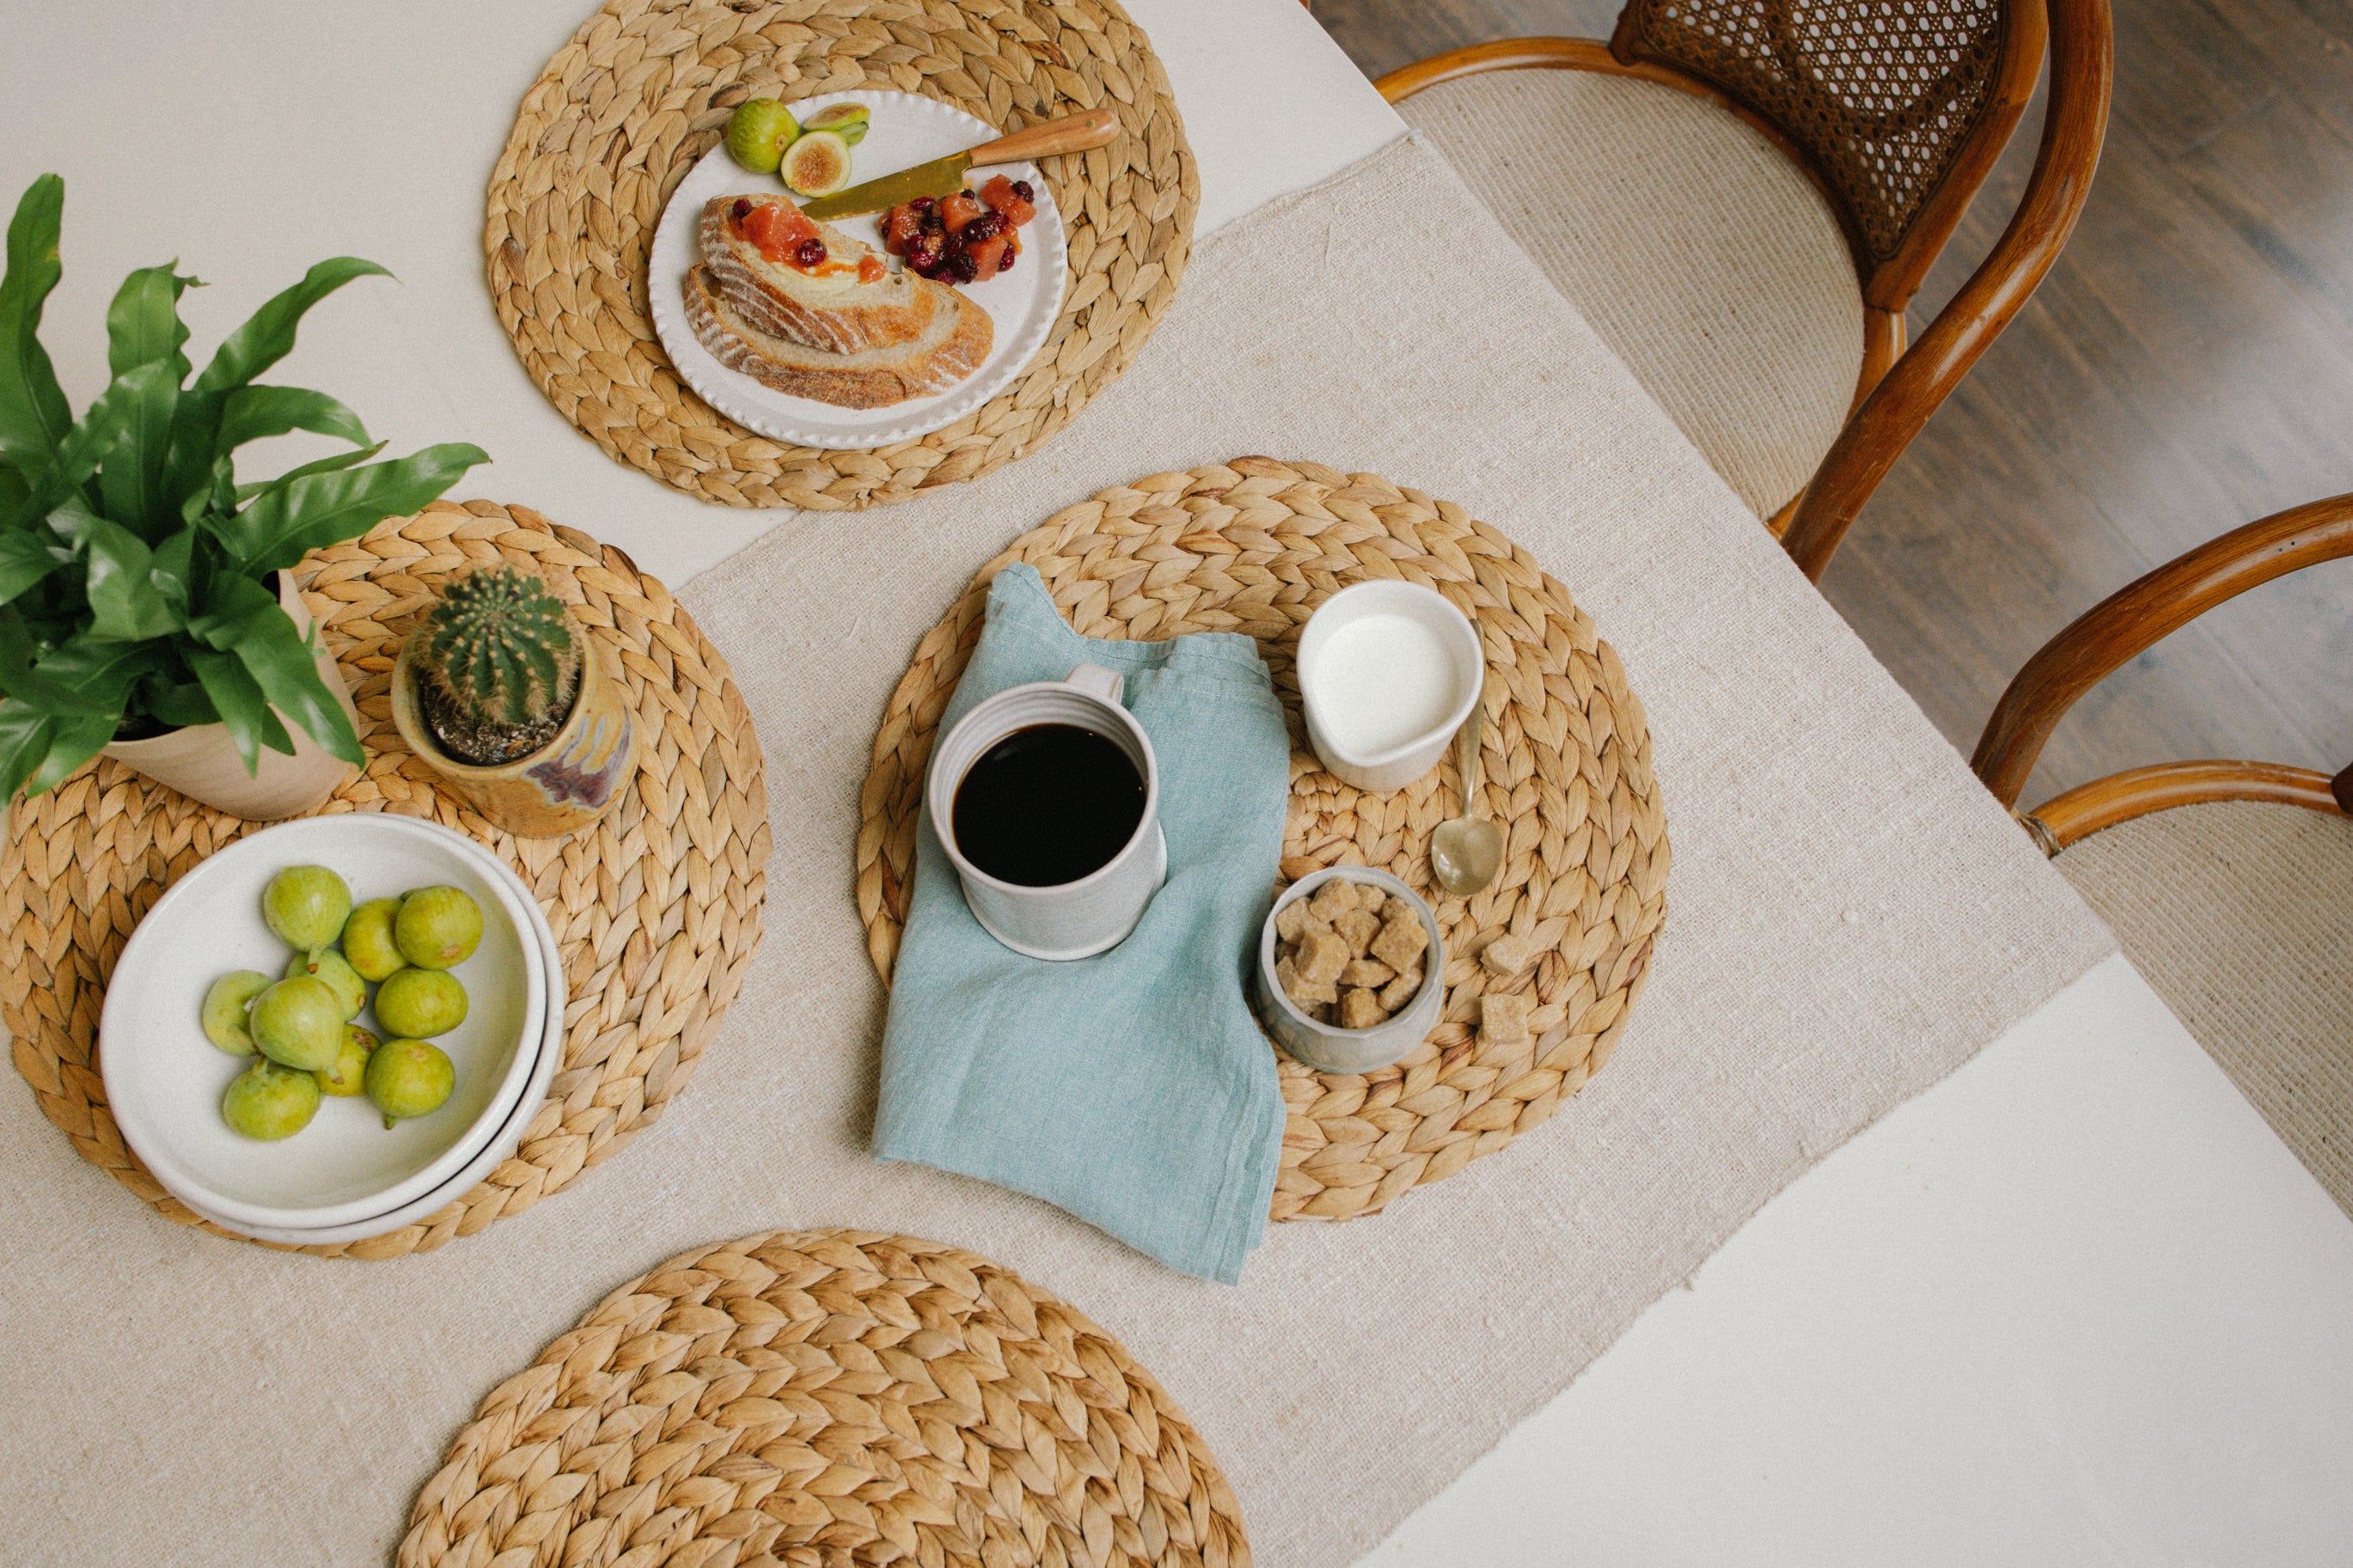 mindful-meal-placemat